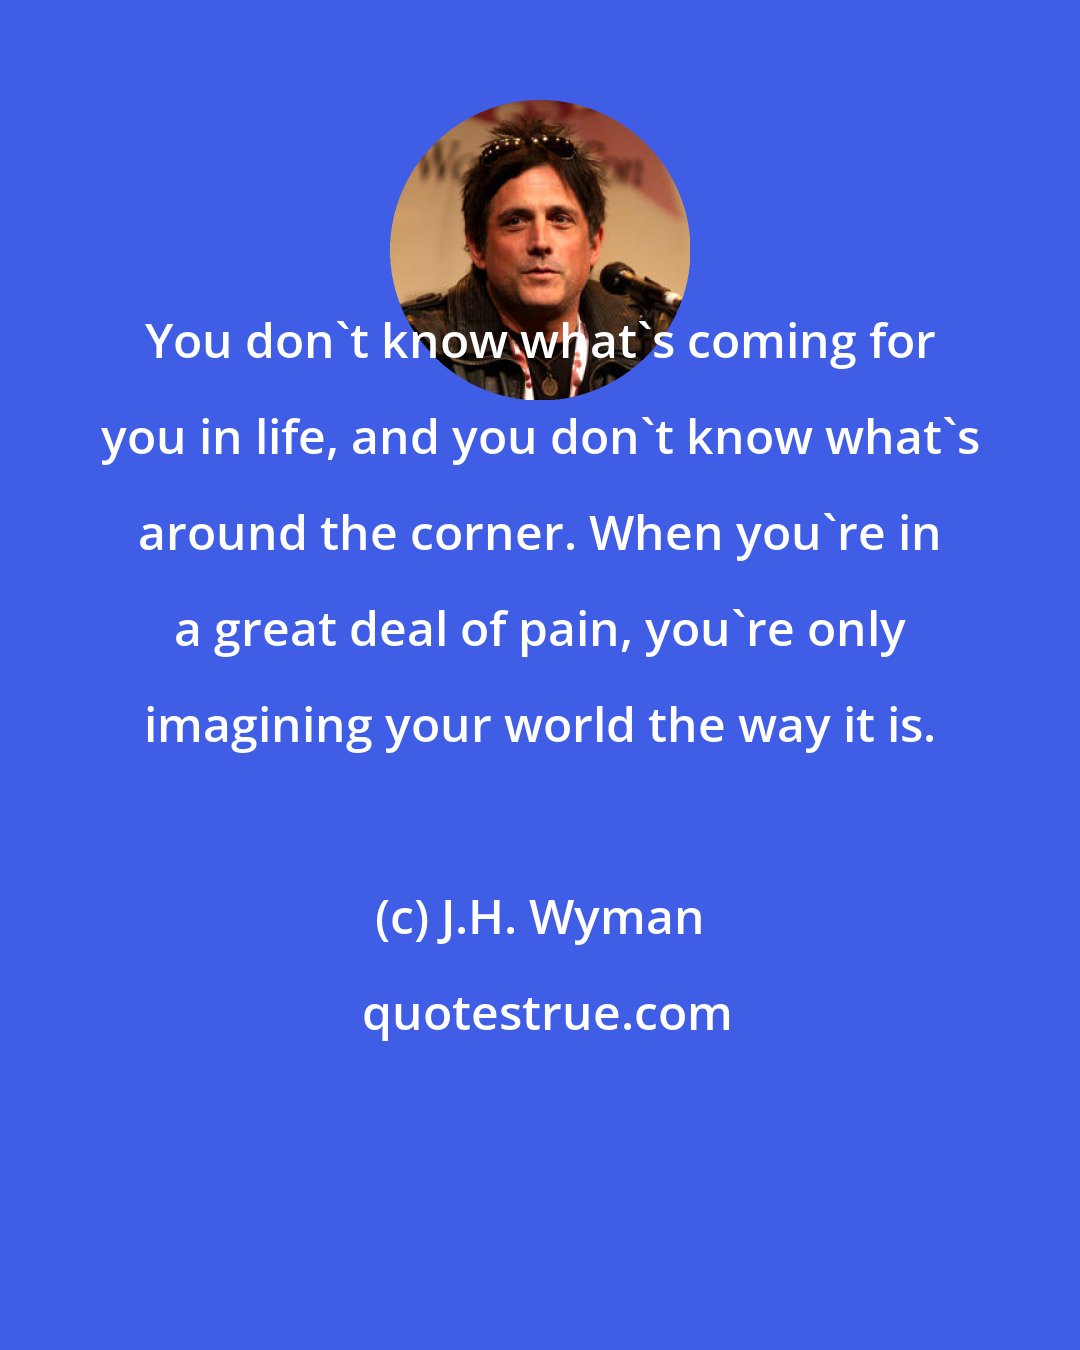 J.H. Wyman: You don't know what's coming for you in life, and you don't know what's around the corner. When you're in a great deal of pain, you're only imagining your world the way it is.